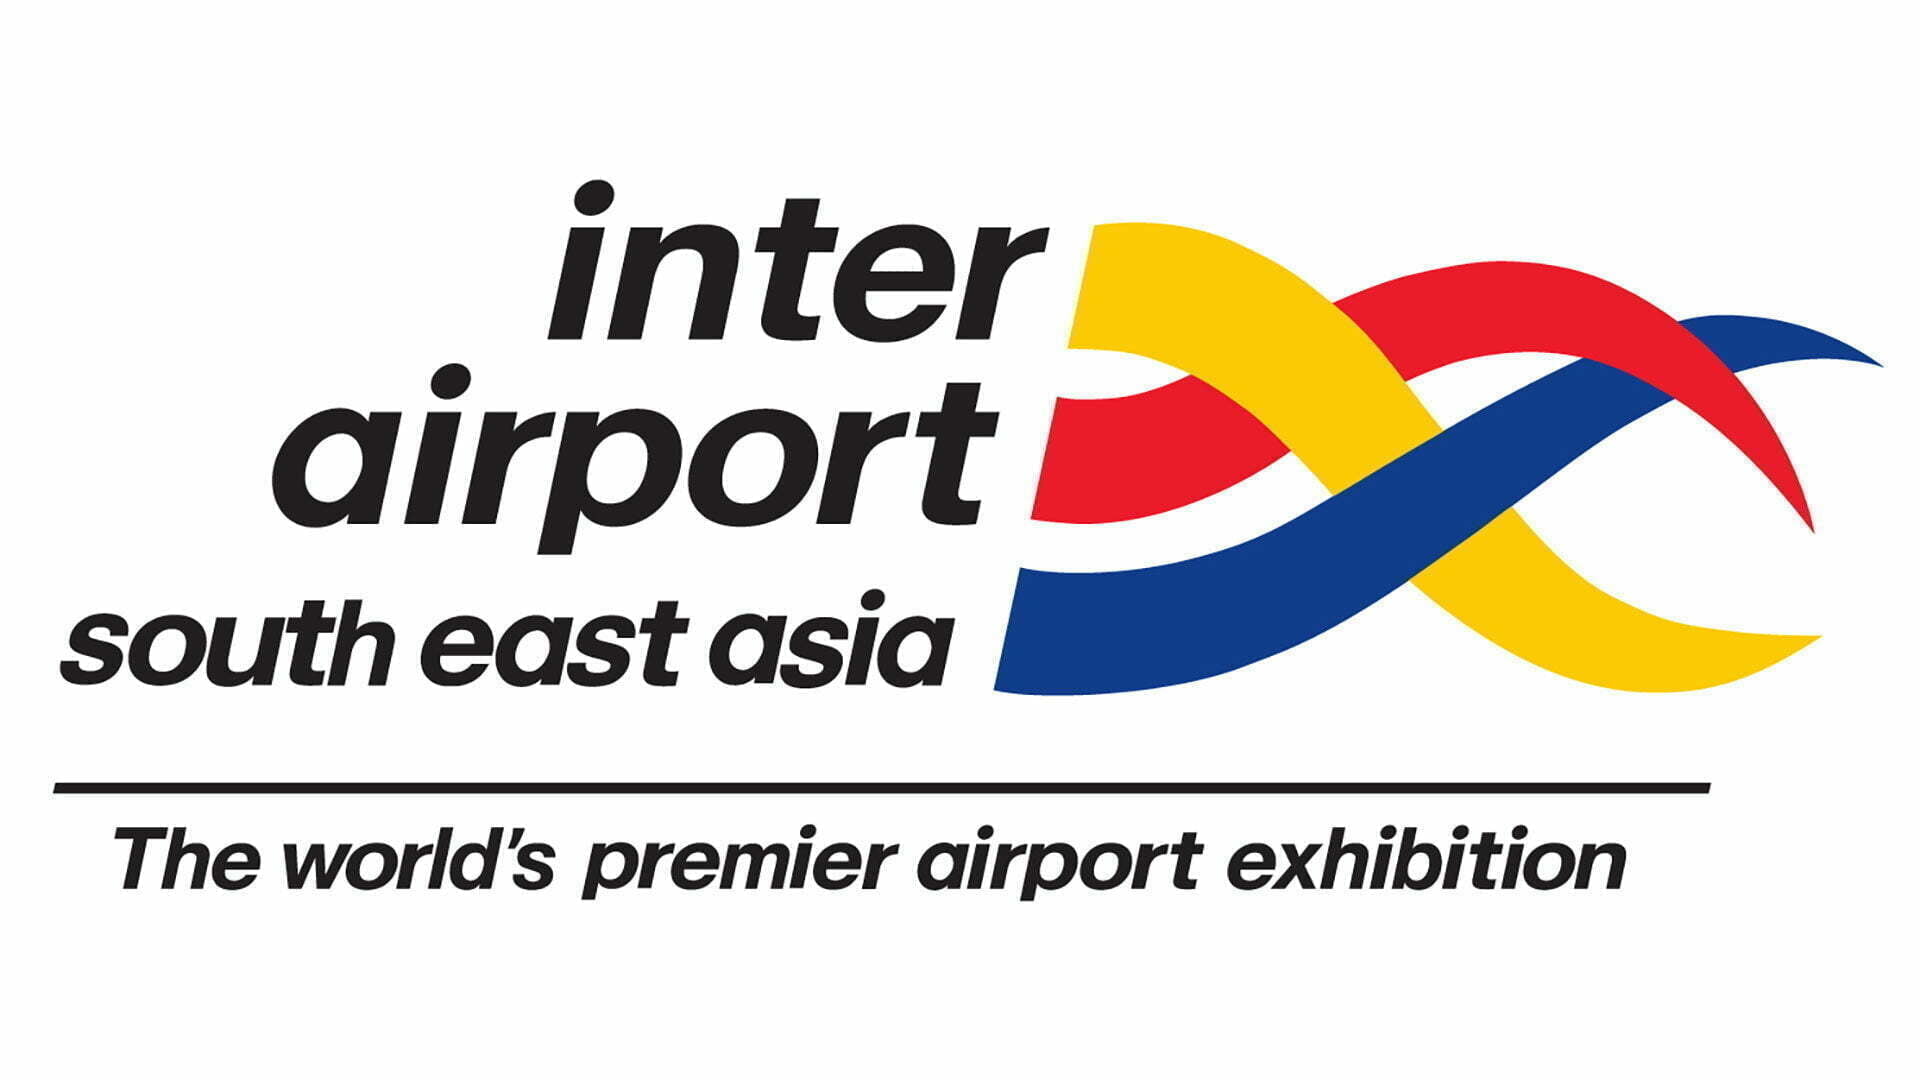 Trade fairs TRILO - inter airport south east asia